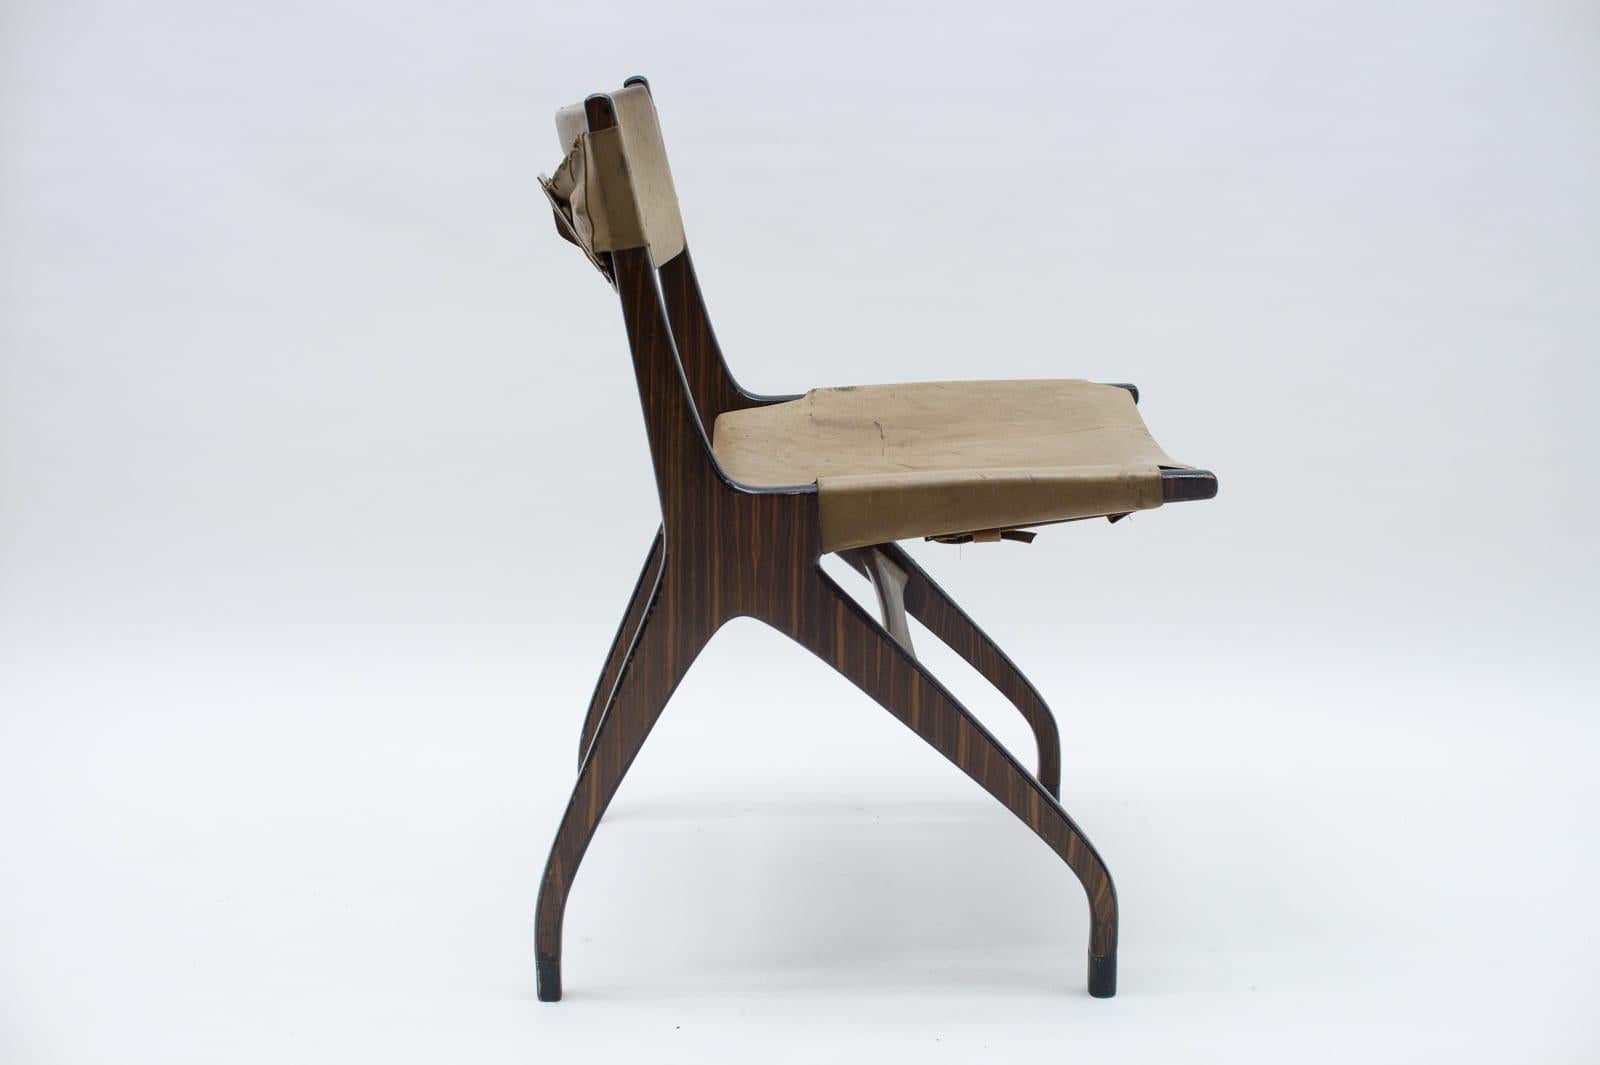 Italian Wooden Chair with Leather Upholstery, 1960s For Sale 1